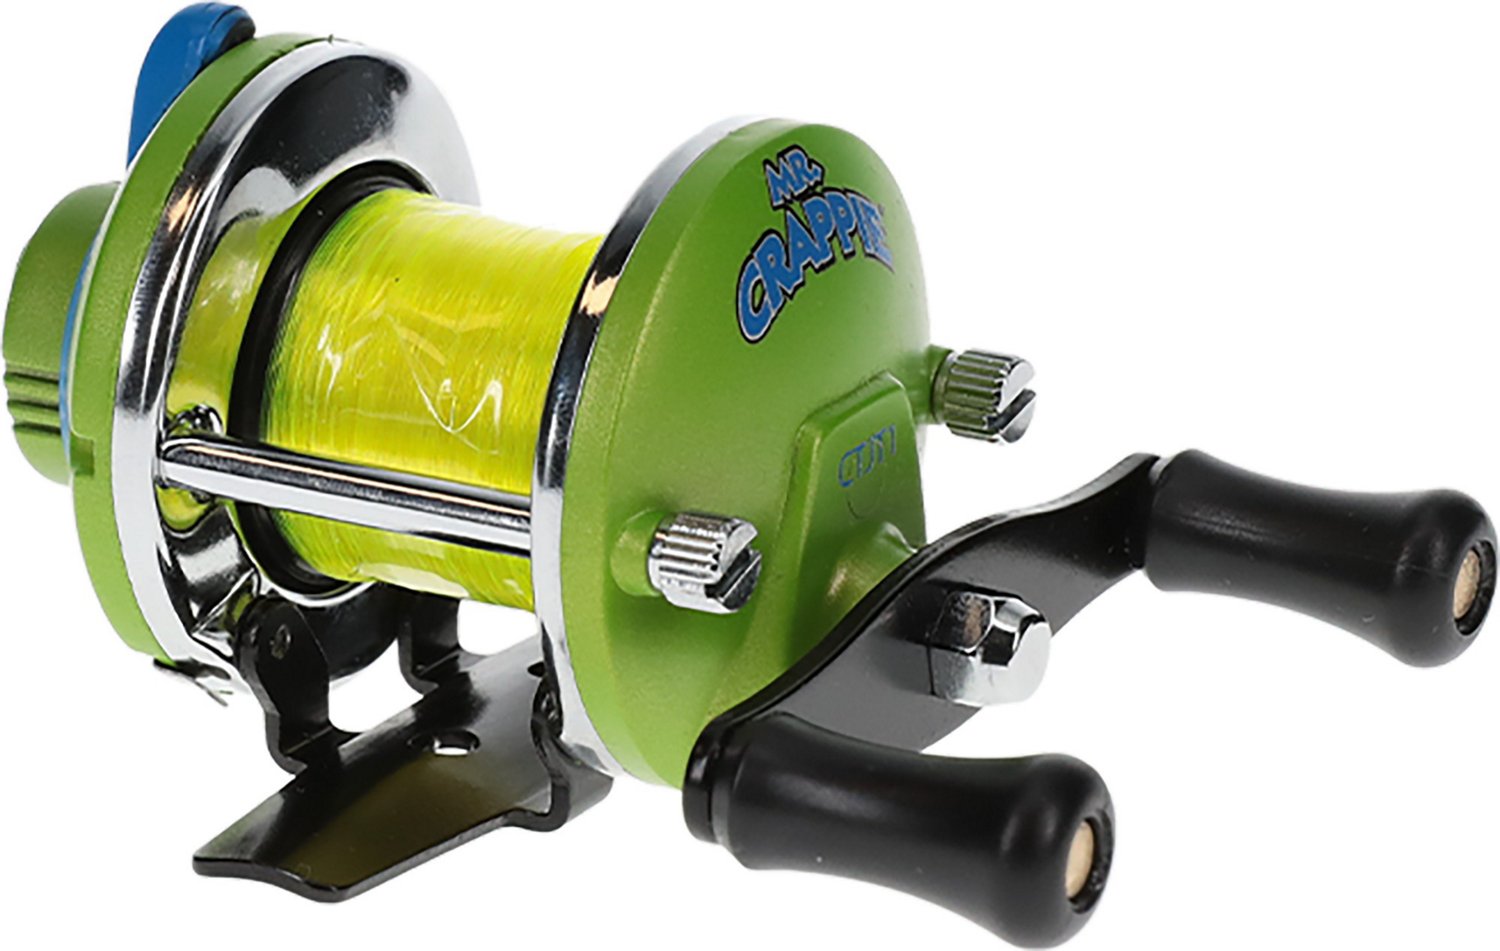 Crappie Thunder Jigging And Trolling Reel